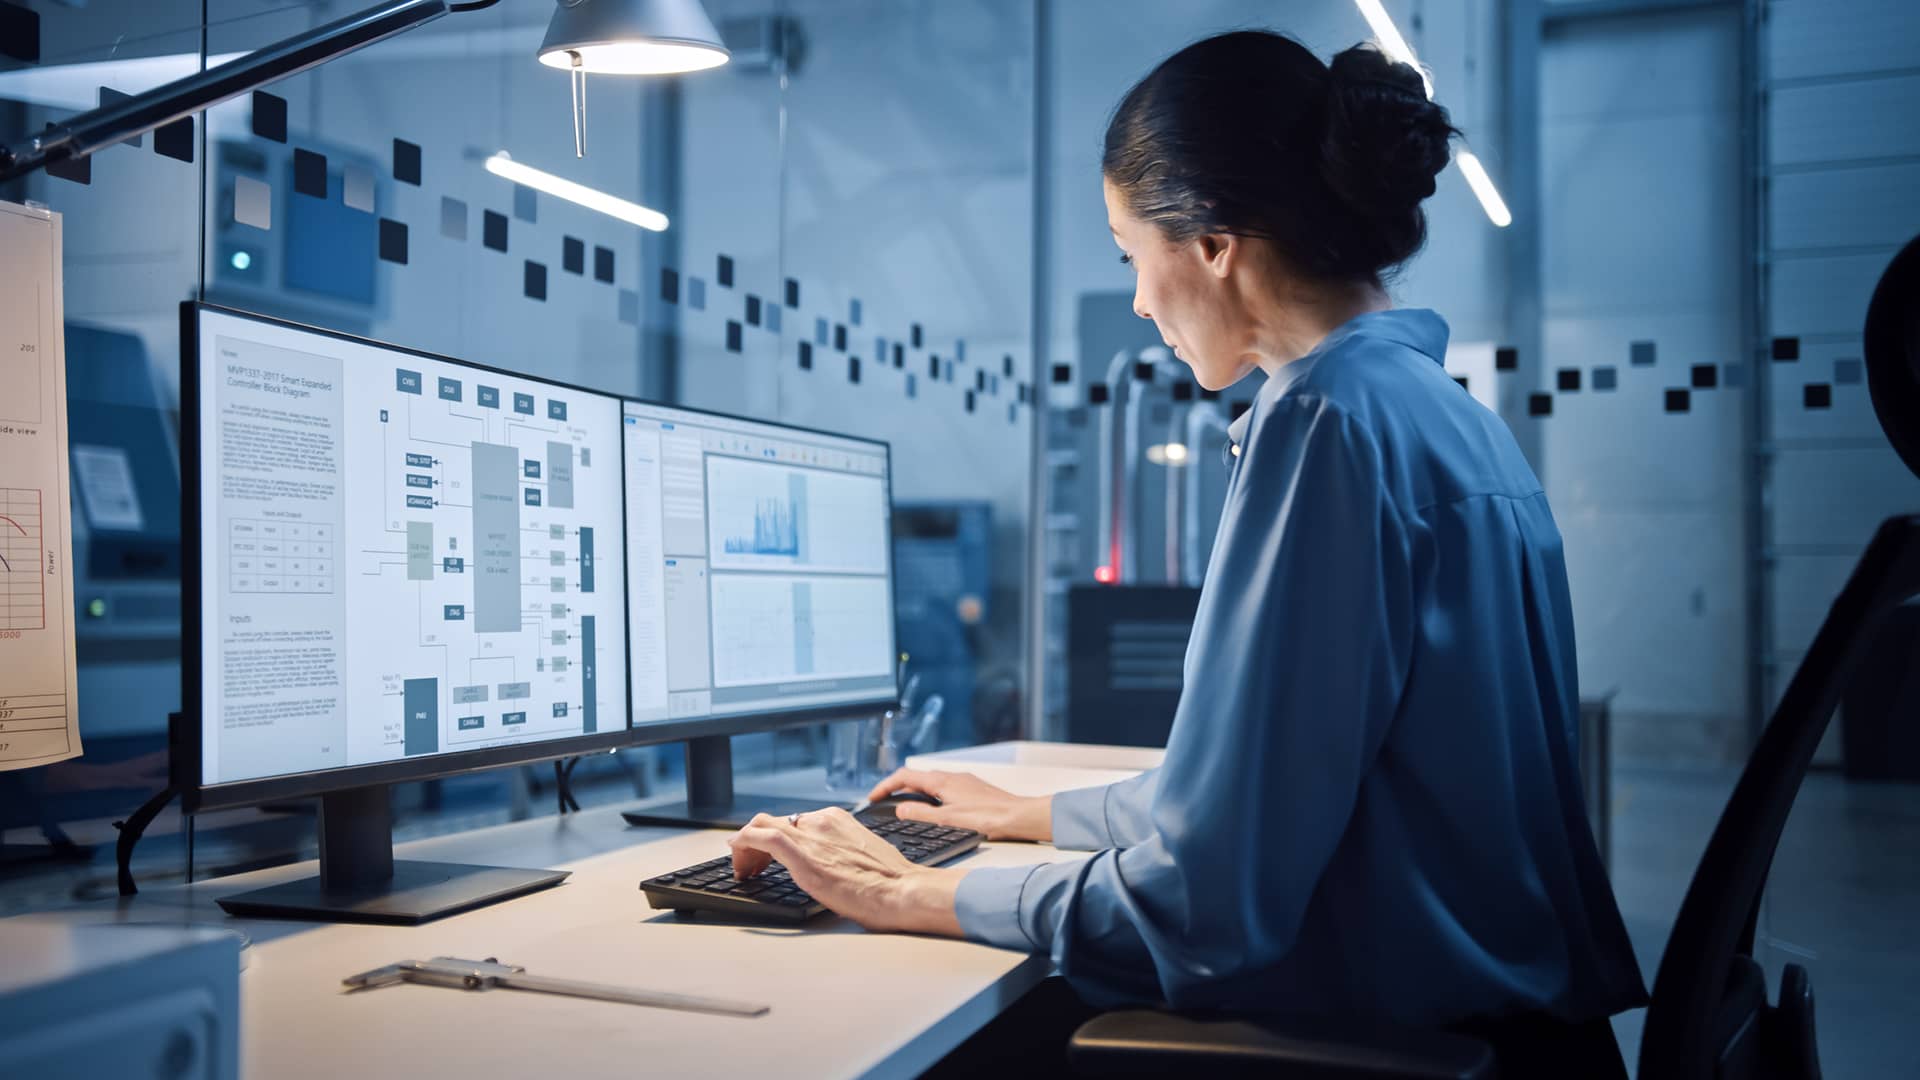 Portrait of a female Industrial Engineer working on computer, using industrial electronics design software containing intellectual property. In the background is a high tech facility with CNC machinery.